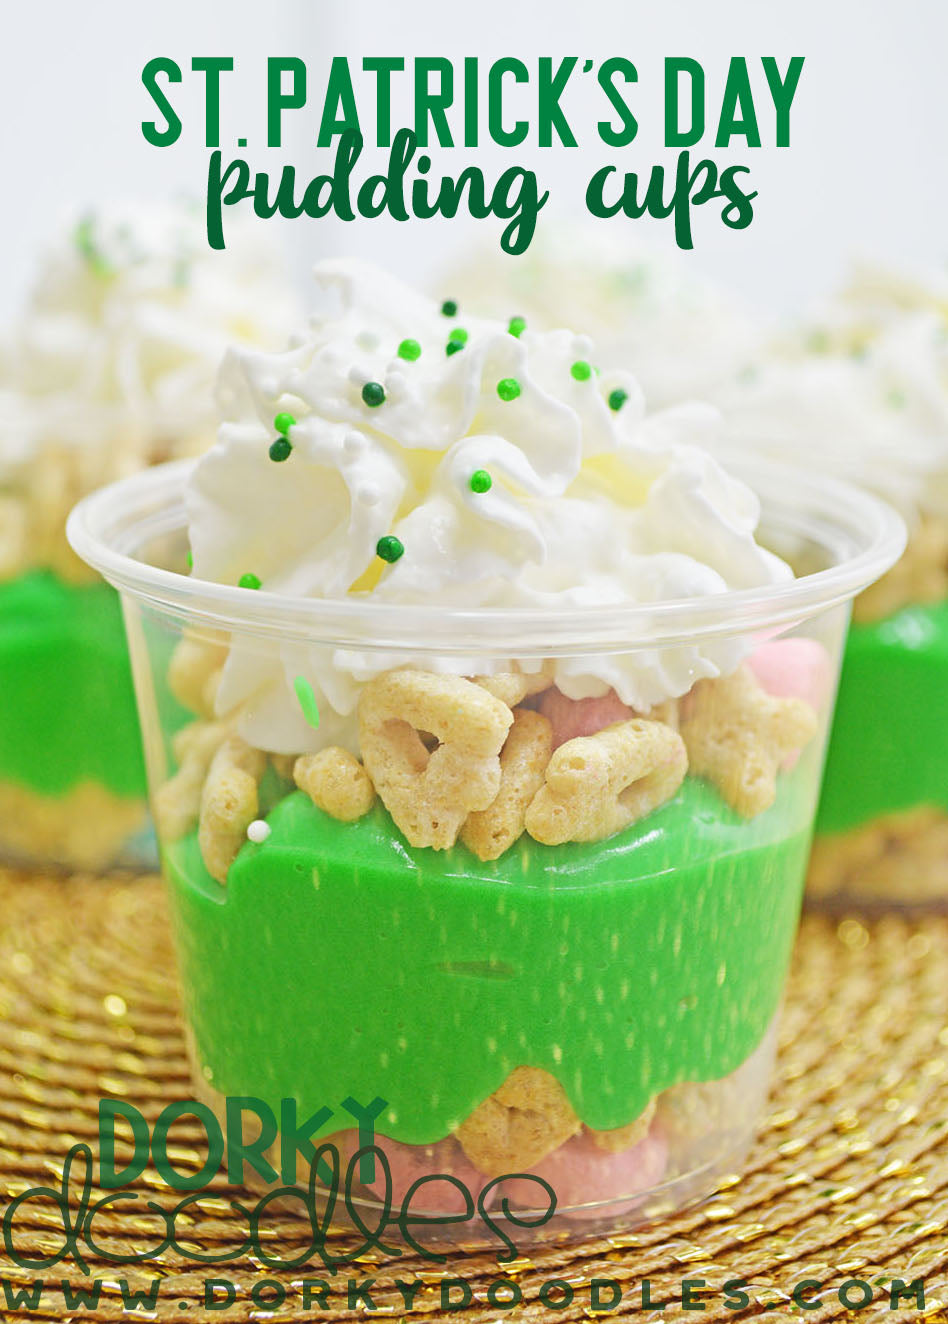 lucky charms pudding cups